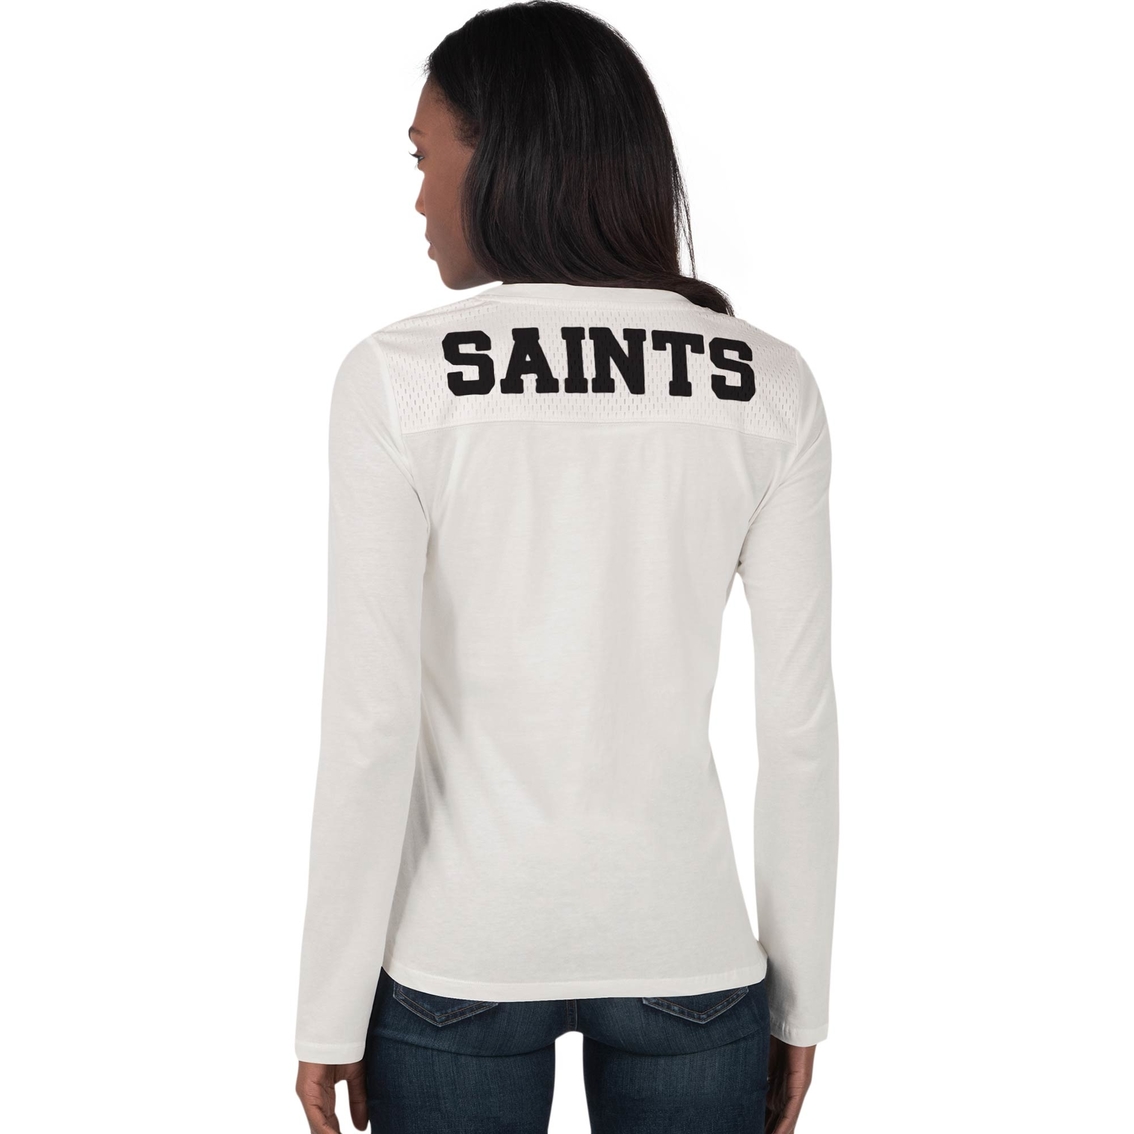 Touch by Alyssa Milano NFL Women's Touchback Tee - Image 2 of 2